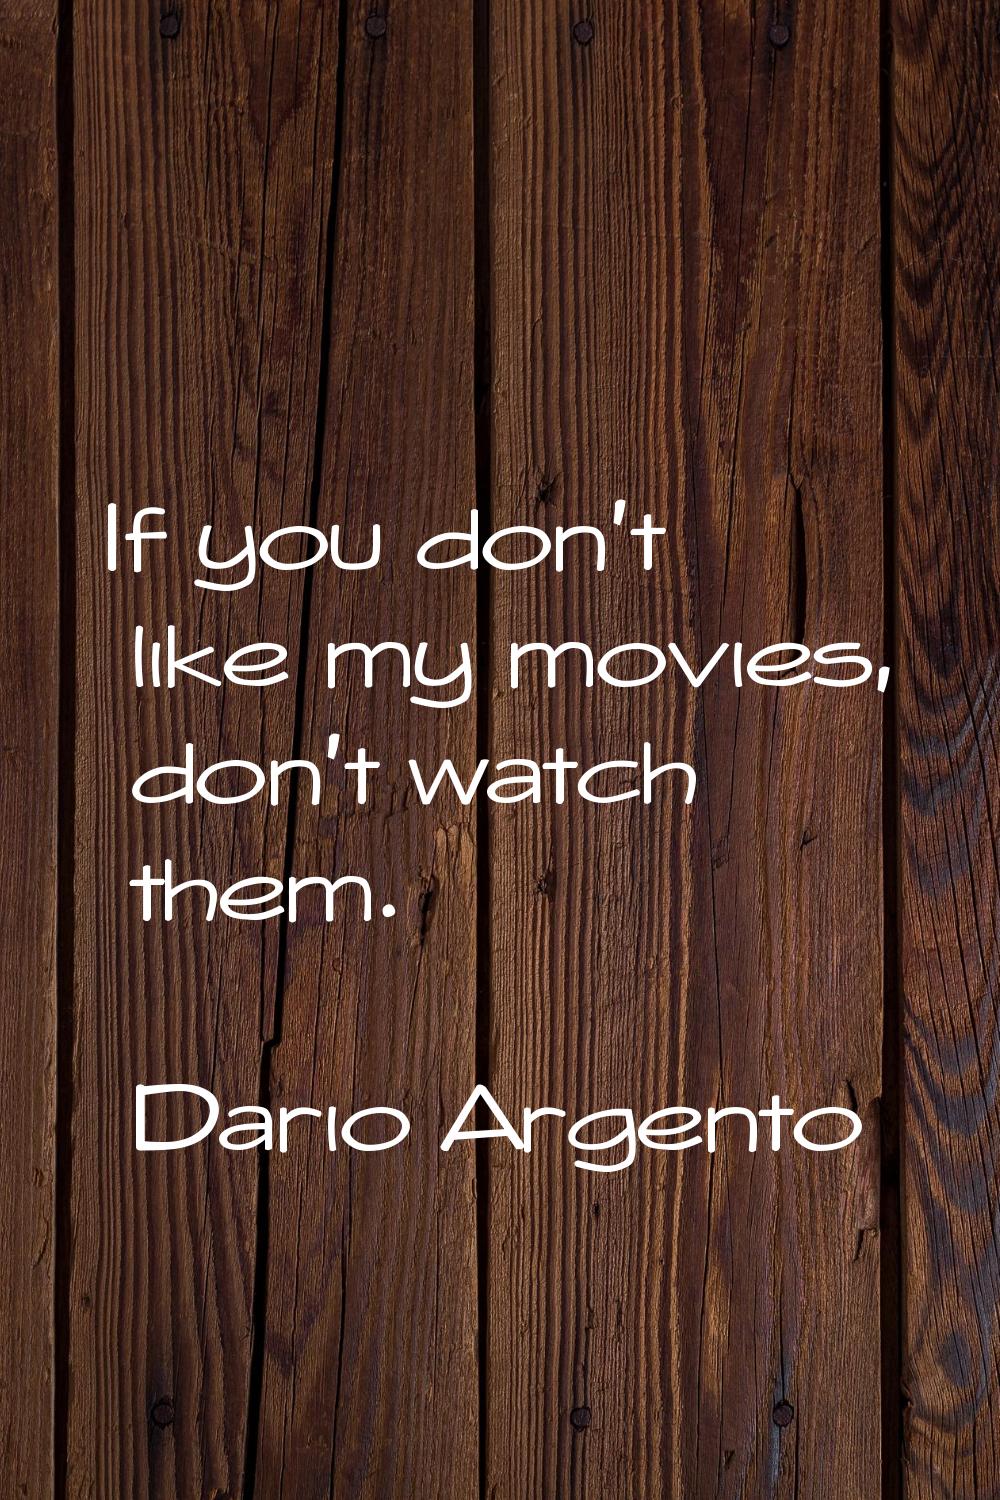 If you don't like my movies, don't watch them.